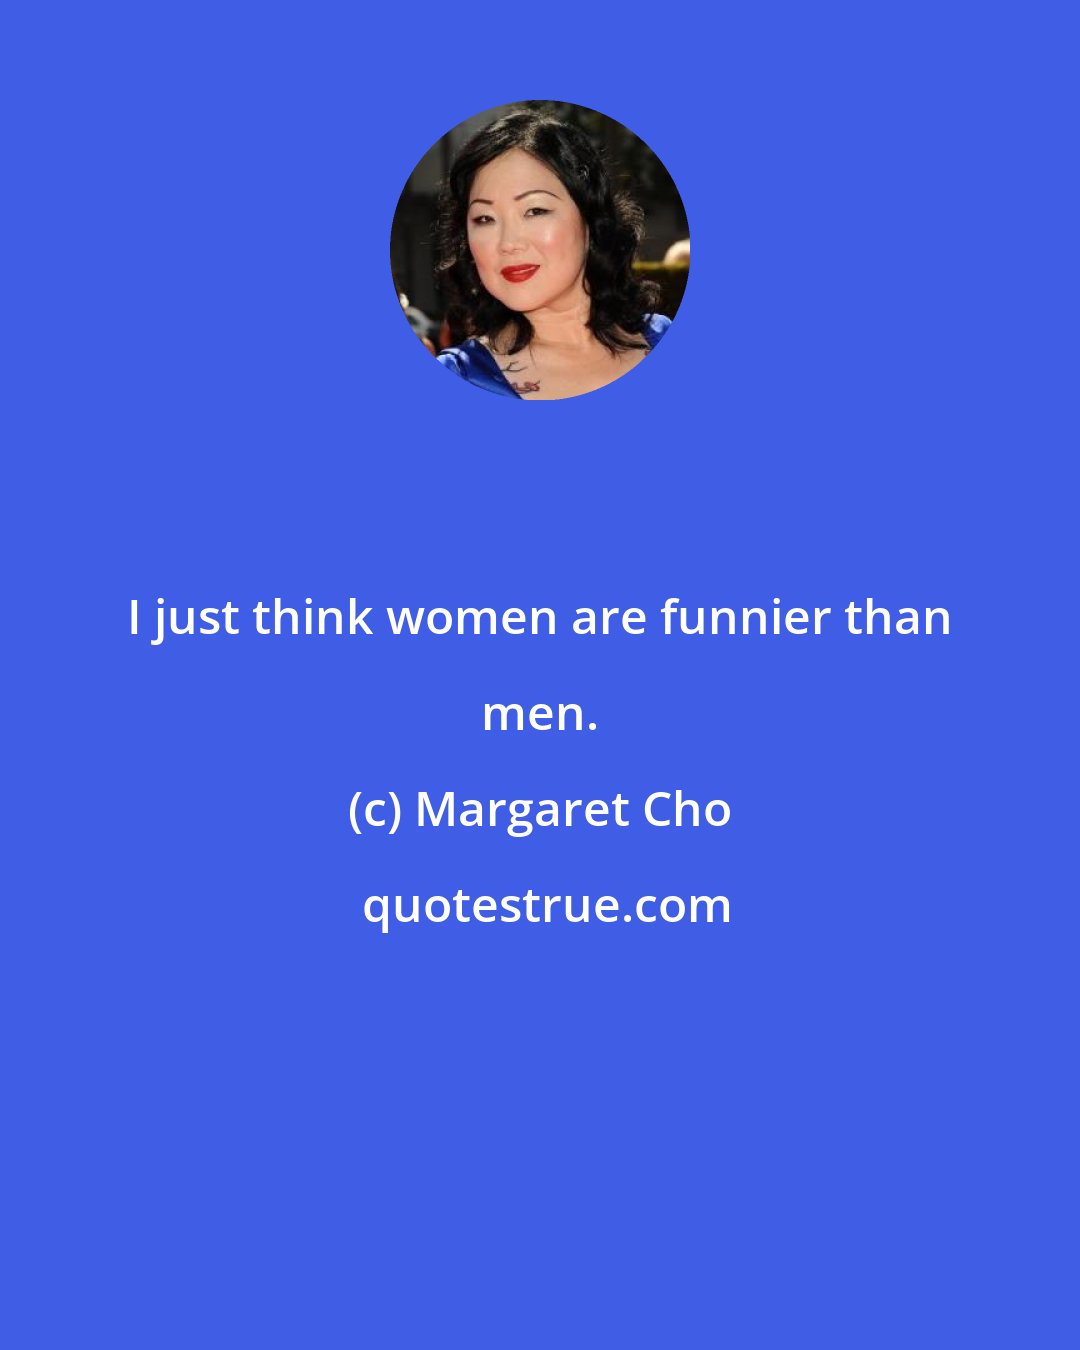 Margaret Cho: I just think women are funnier than men.